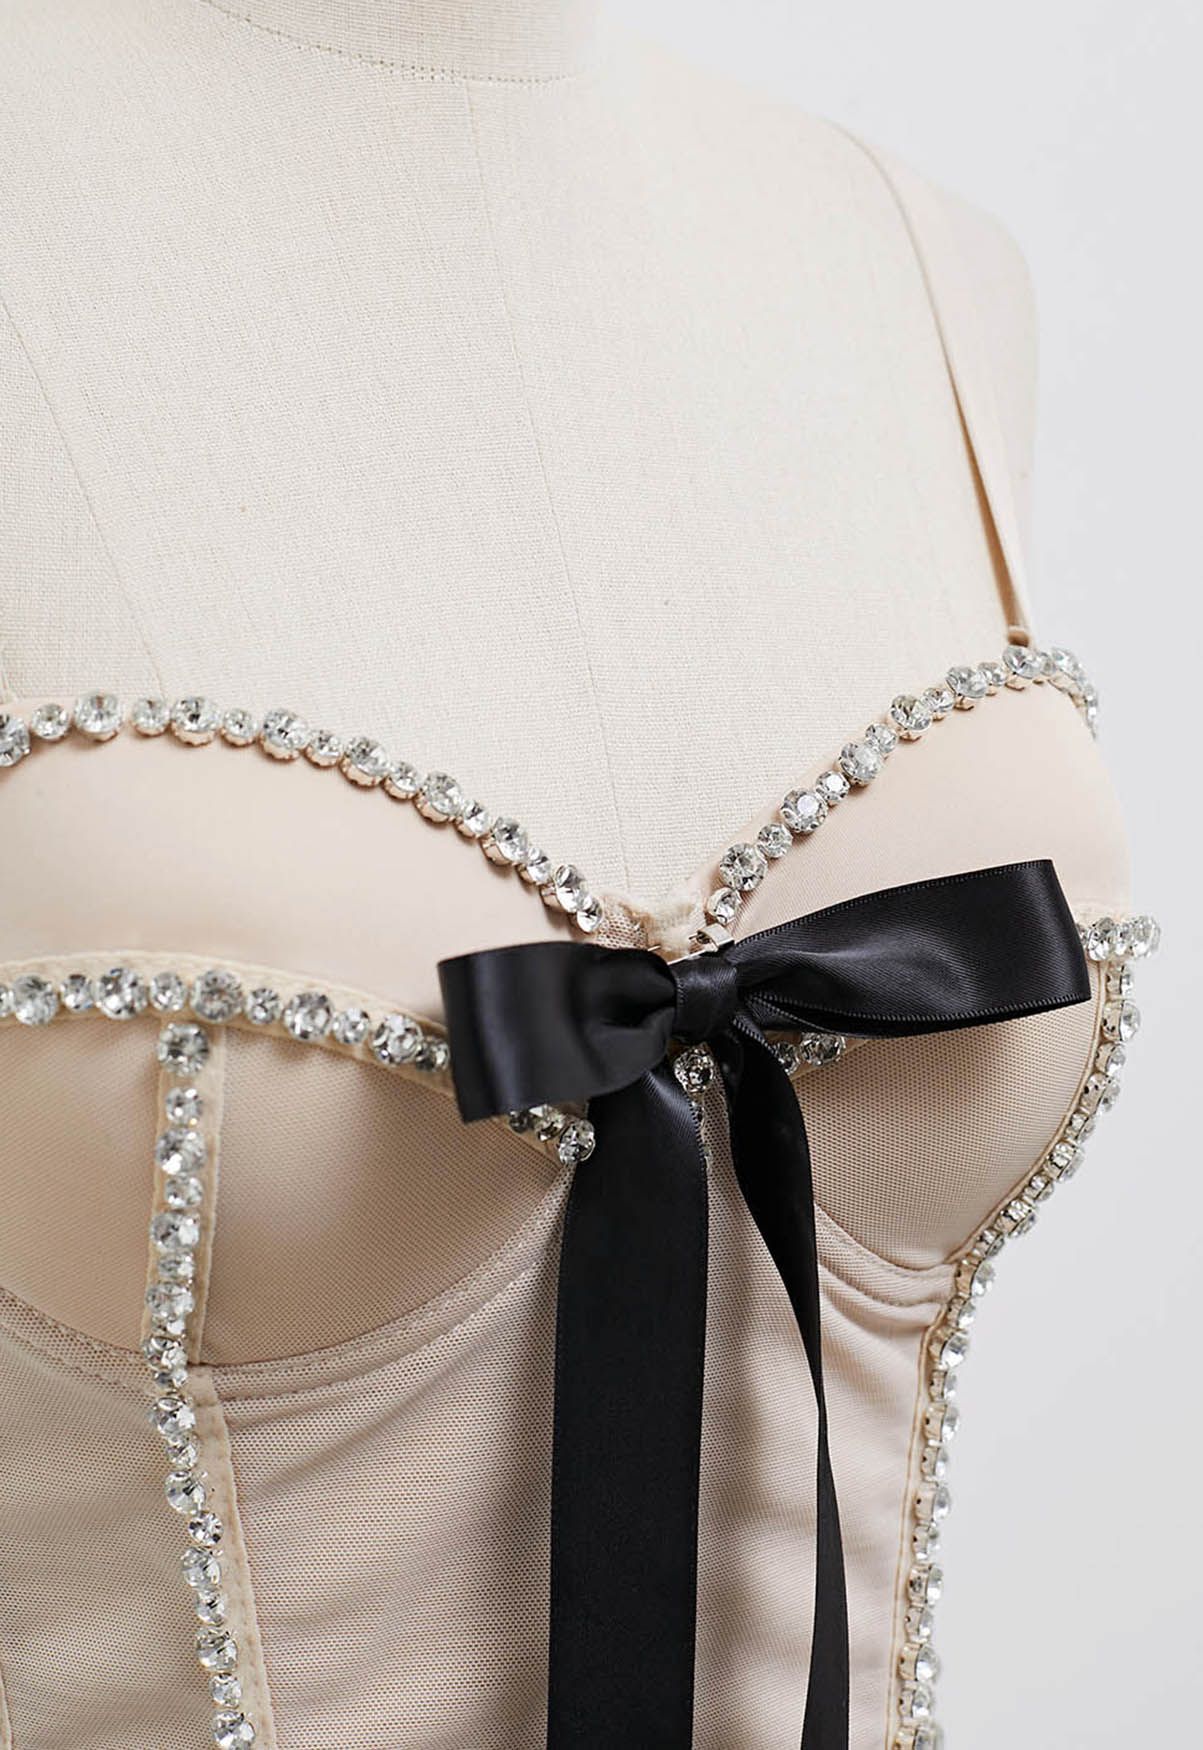 Bowknot Rhinestone Embellished Bustier Crop Top in Apricot